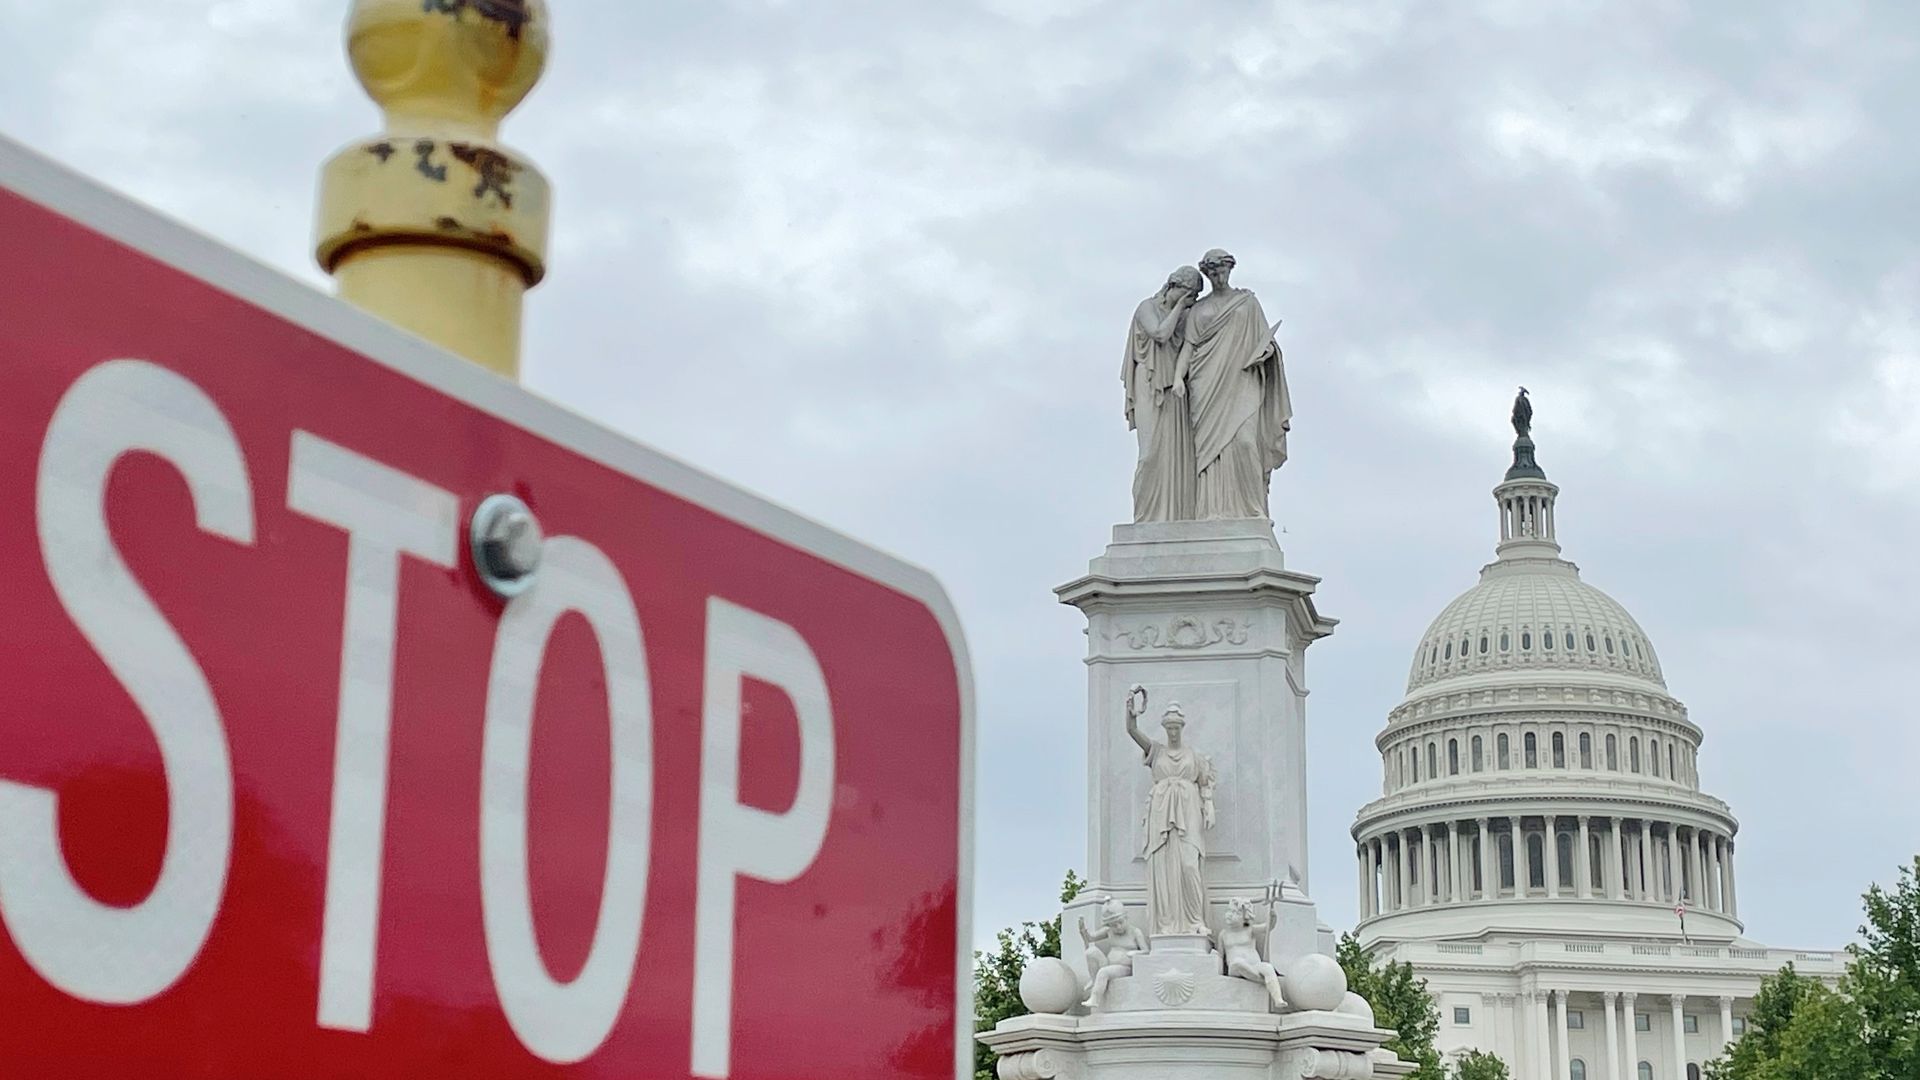 Capitol with STOP sign near by